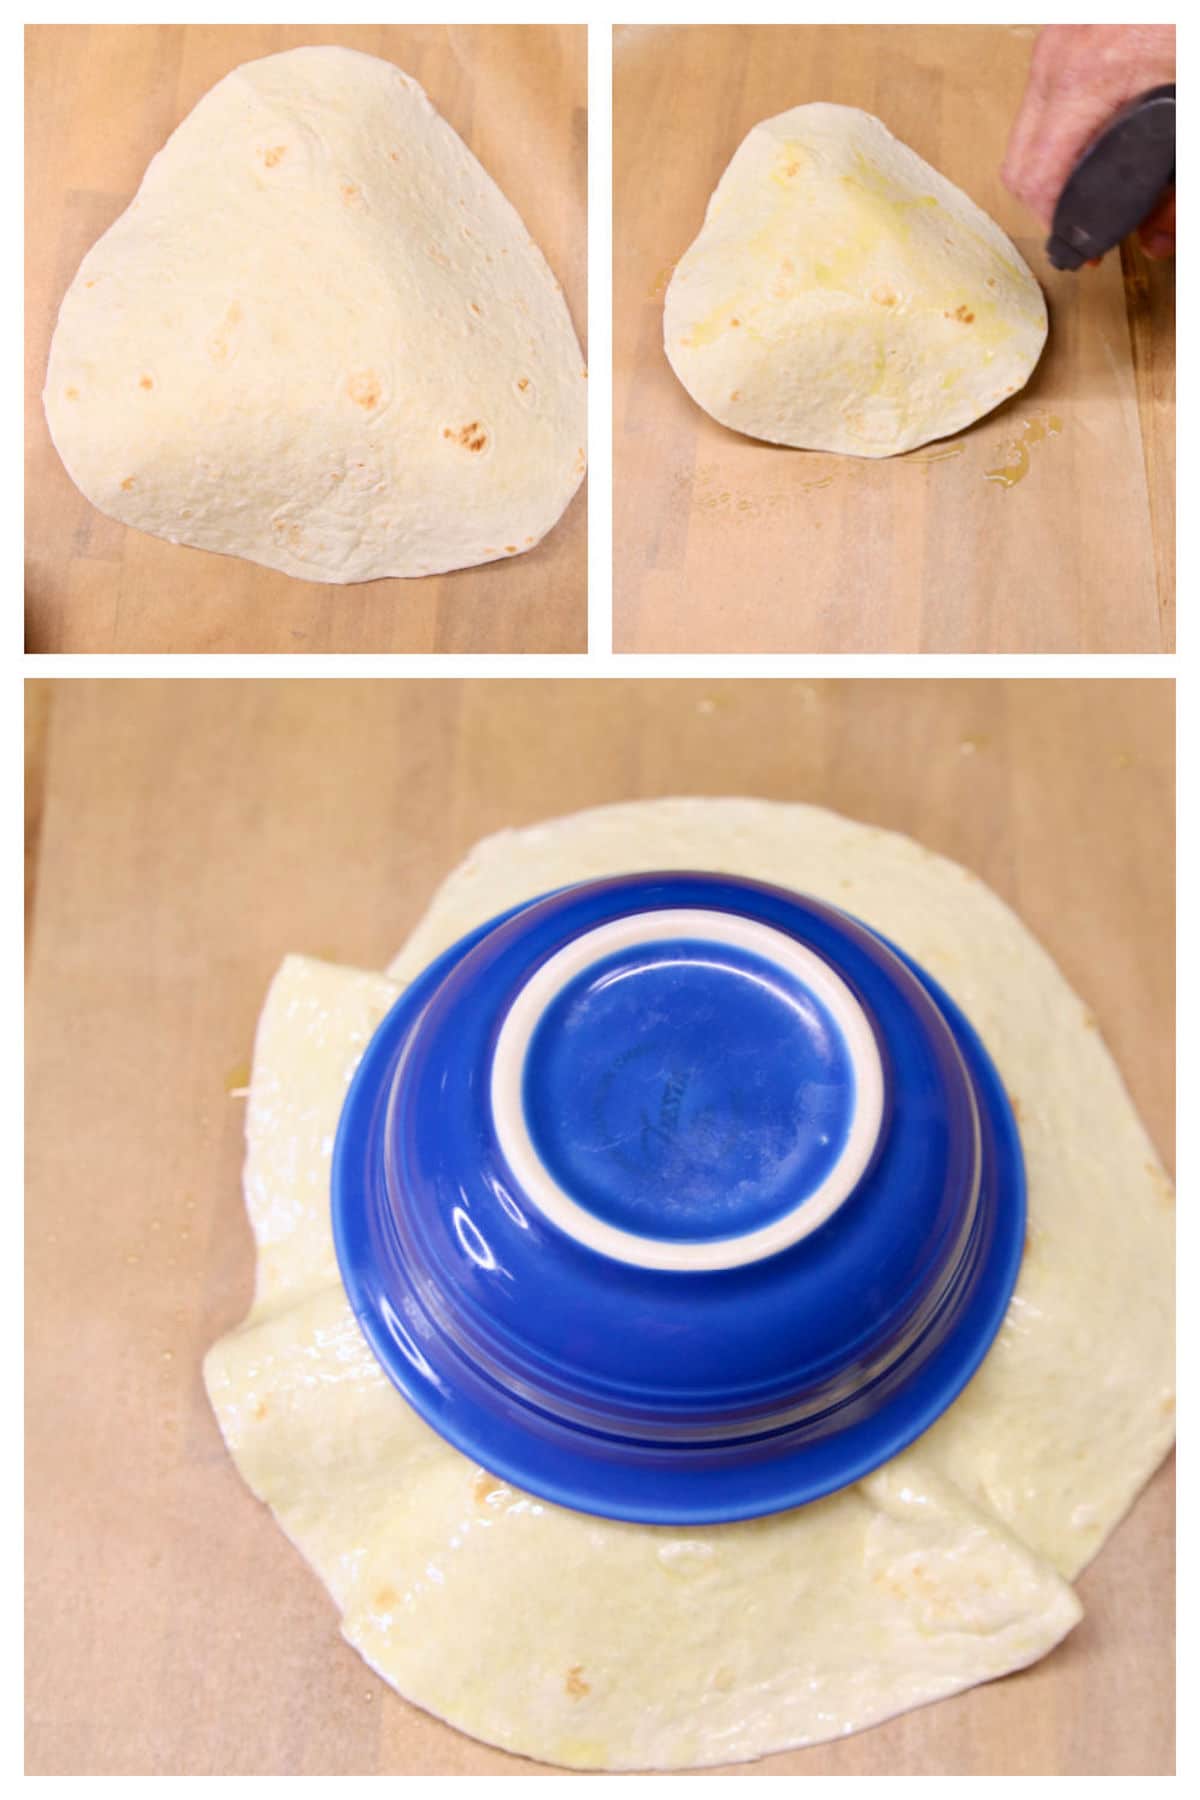 Collage making taco salad bowls with flour tortillas.